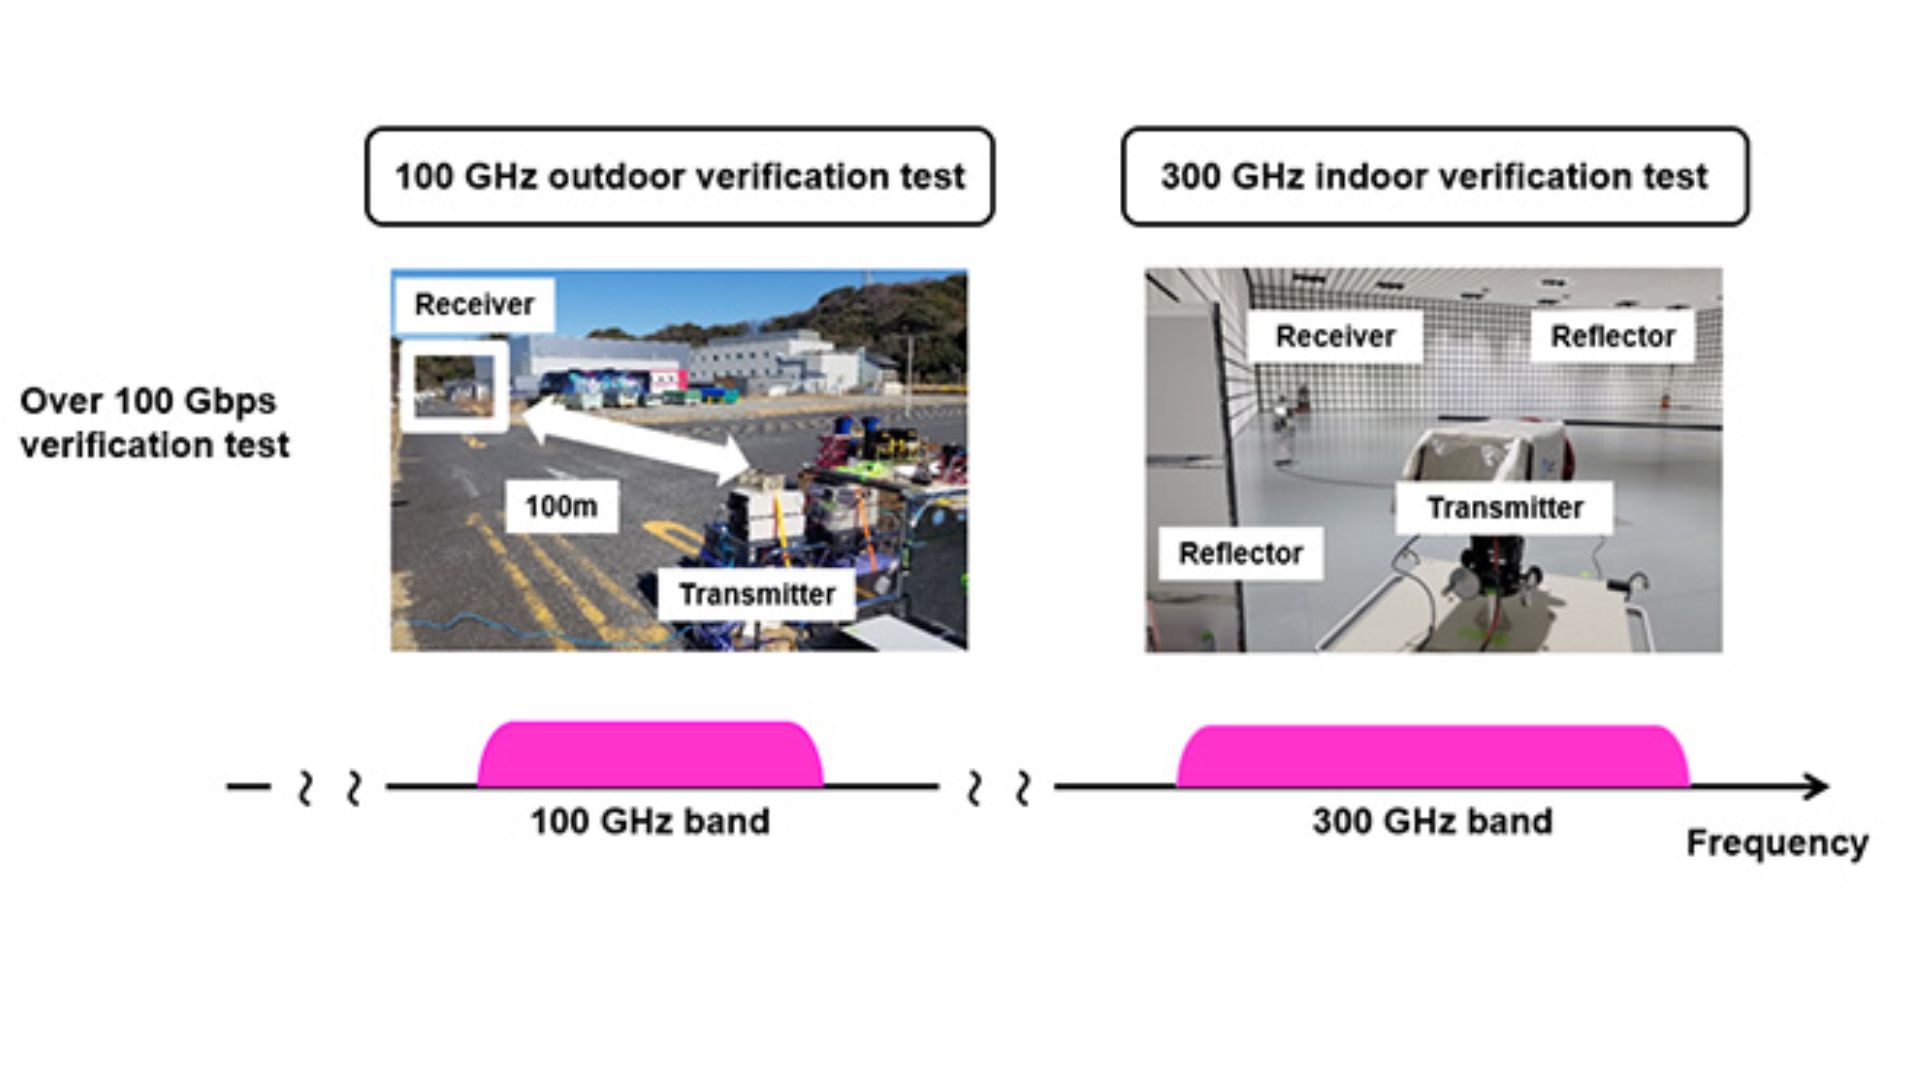 Verification test in the 100 GHz and 300 GHz bands.